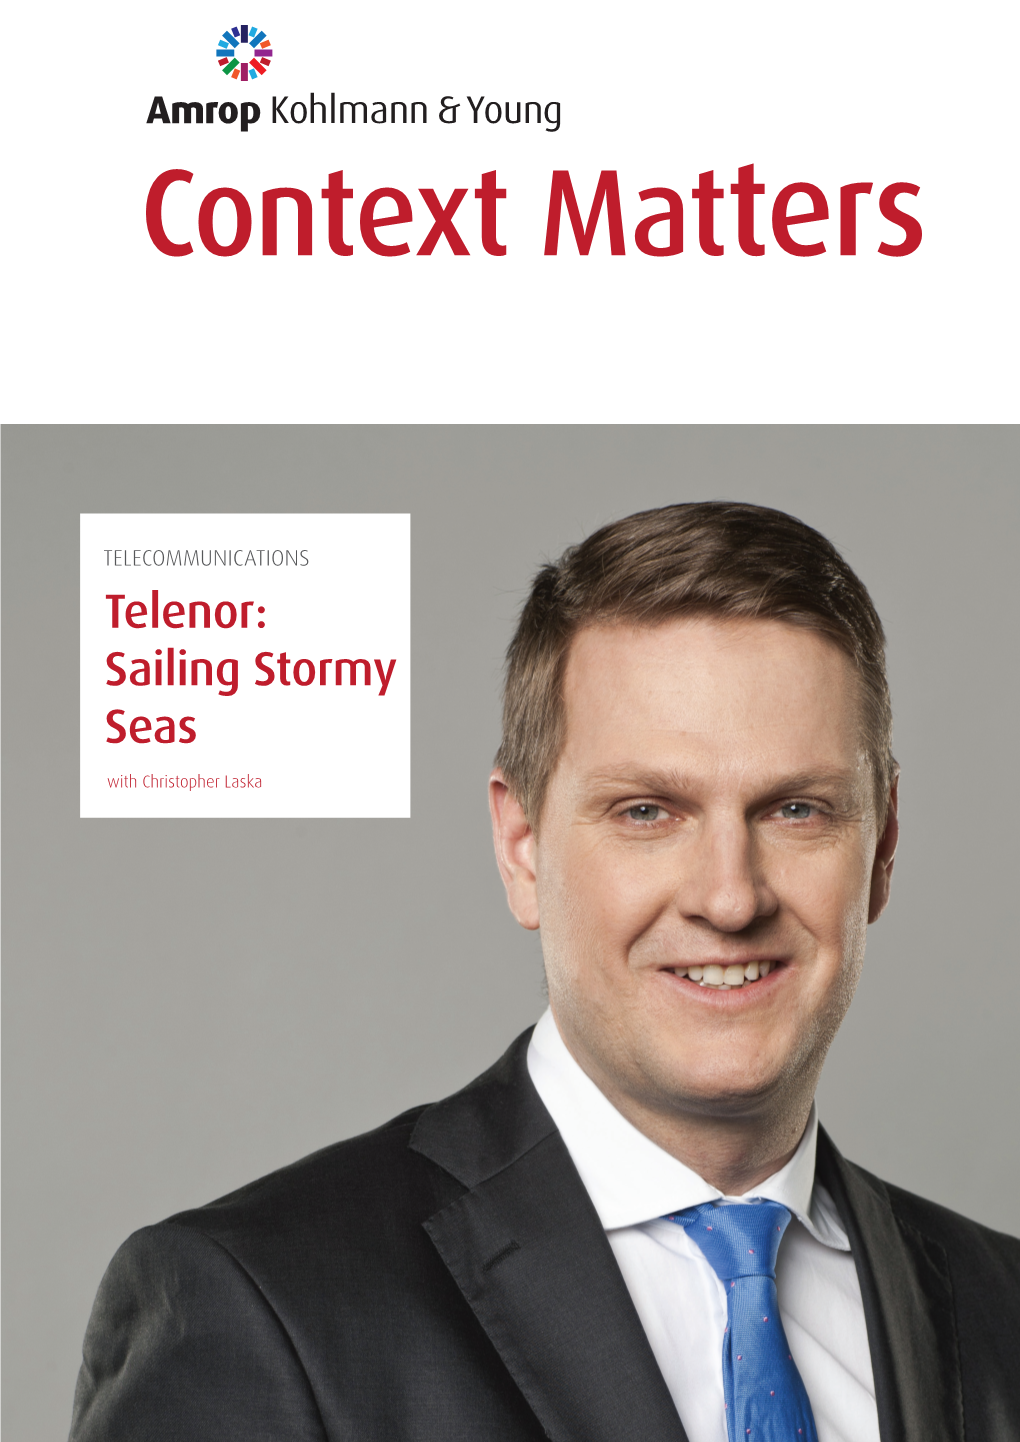 Telenor: Sailing Stormy Seas with Christopher Laska Telenor: Sailing Stormy Seas